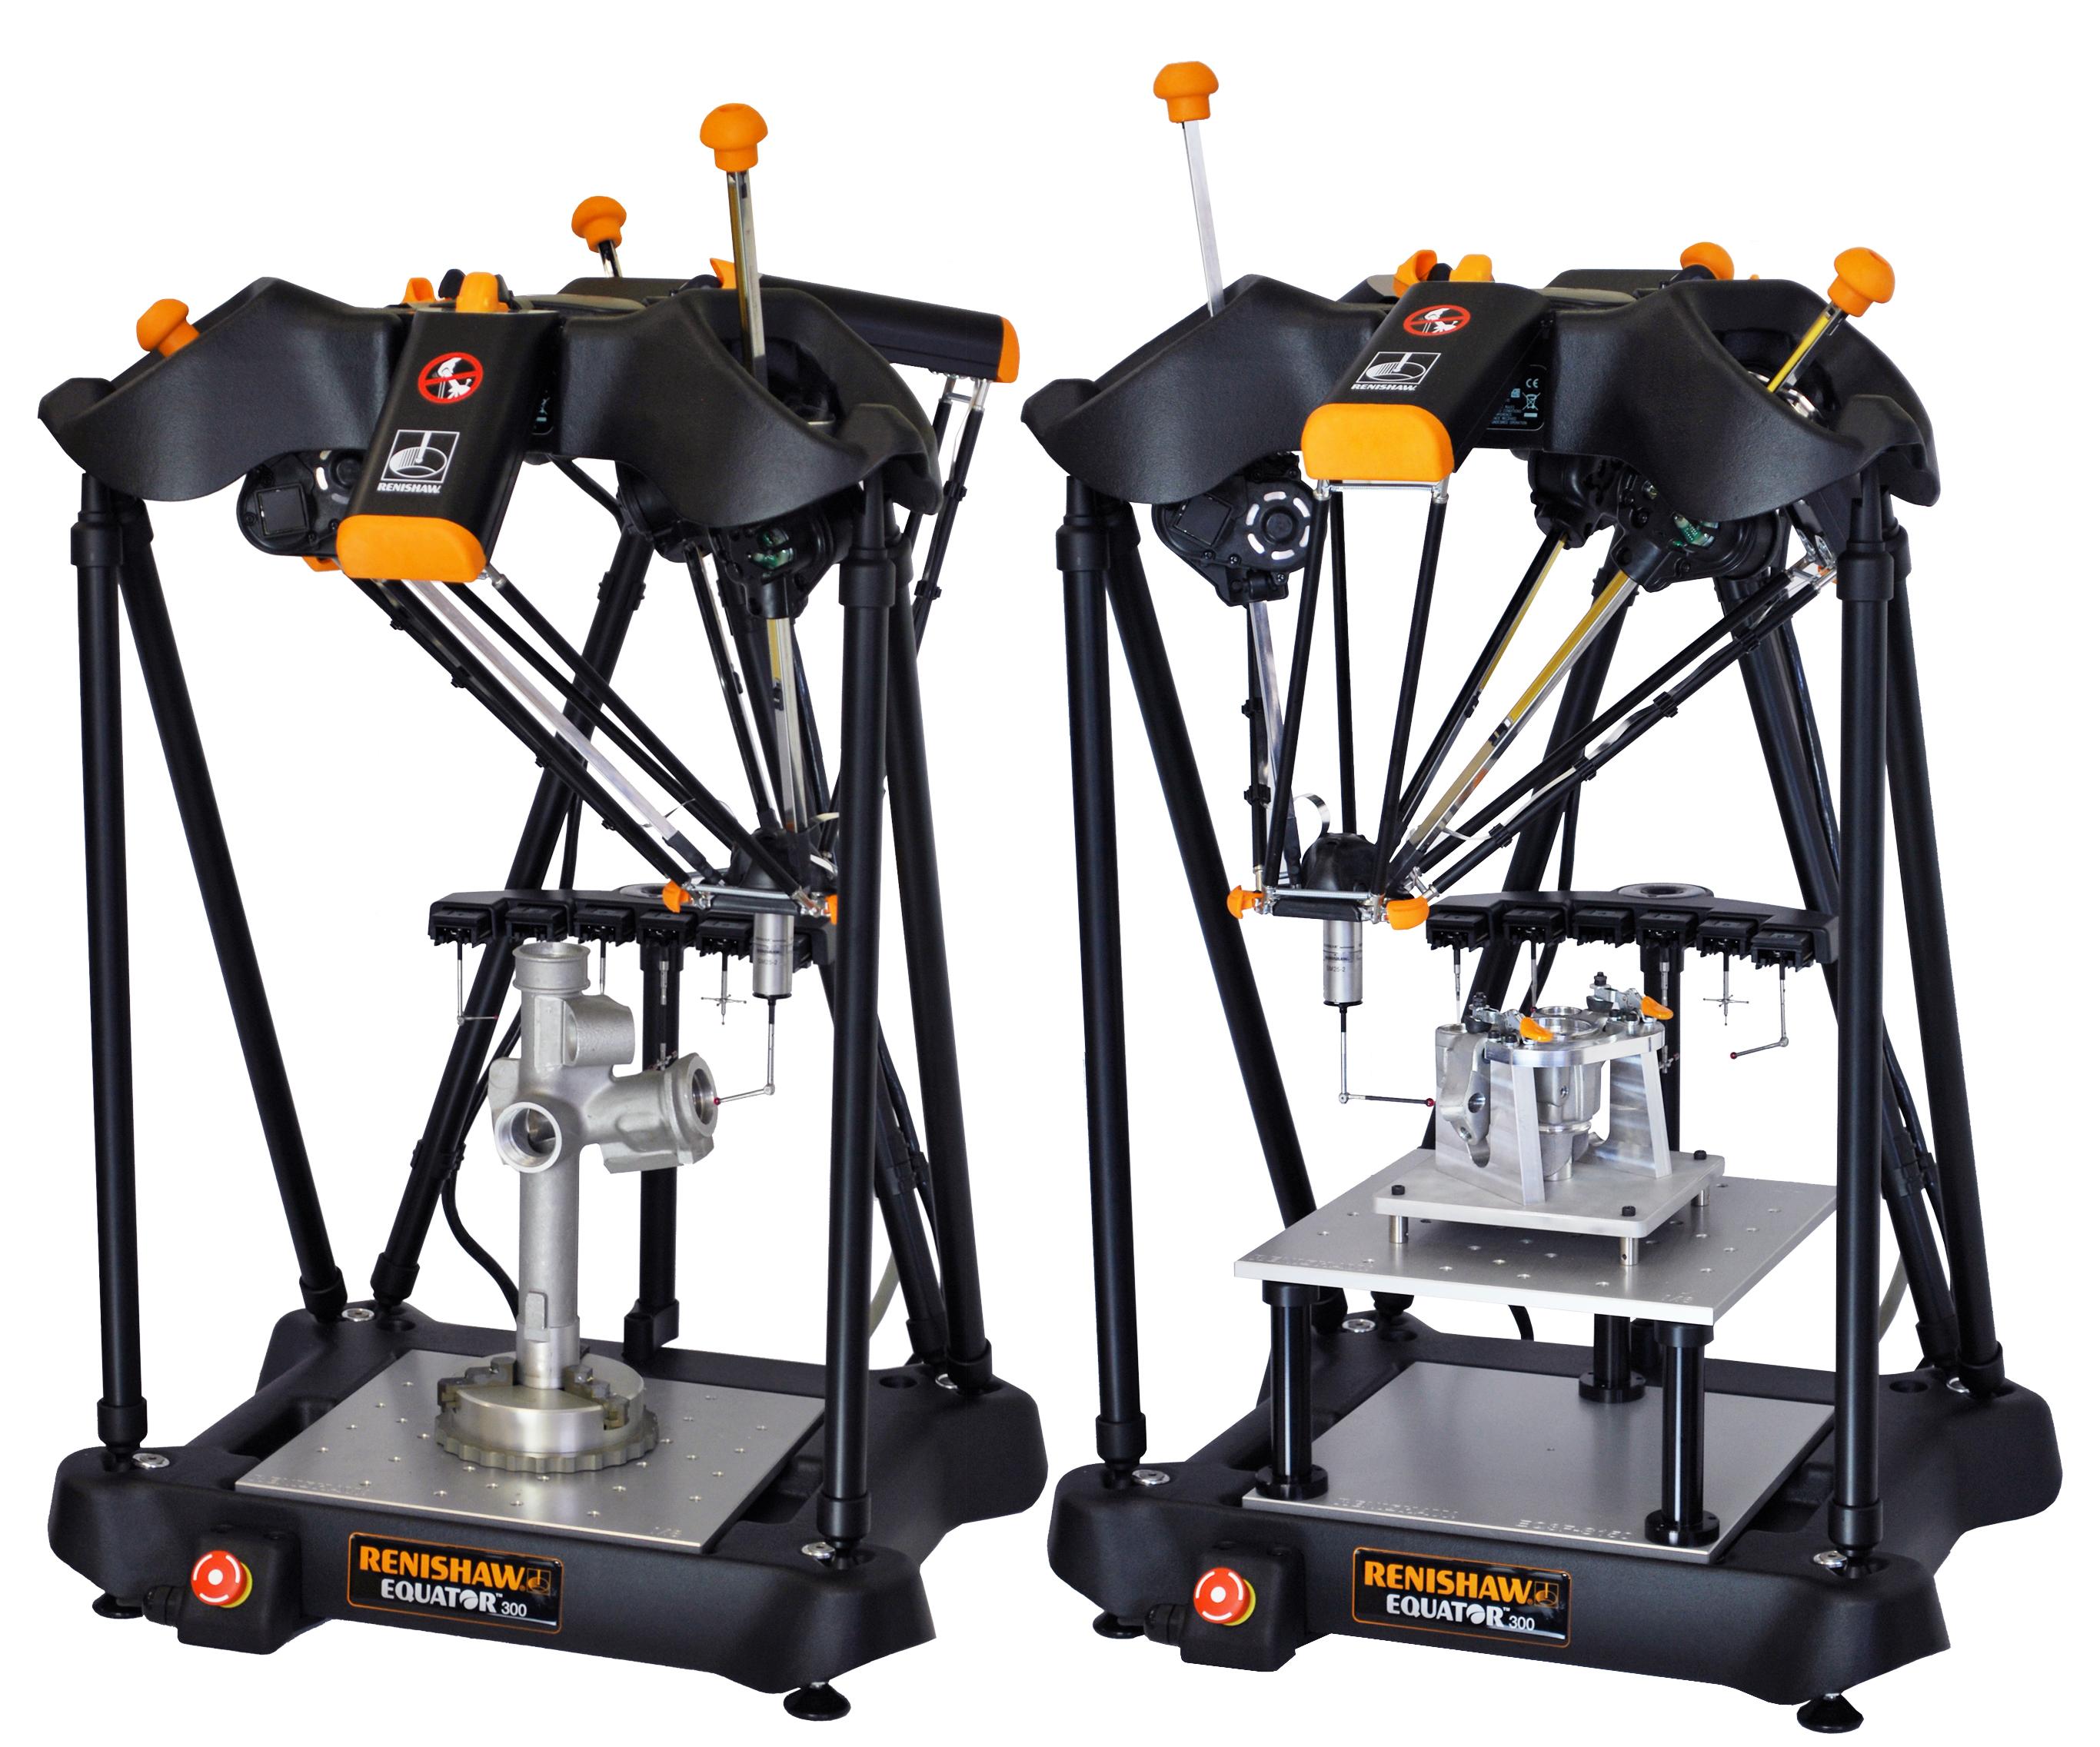 Renishaw to Unveil PlusPac Upgrade for Their AM250 Additive